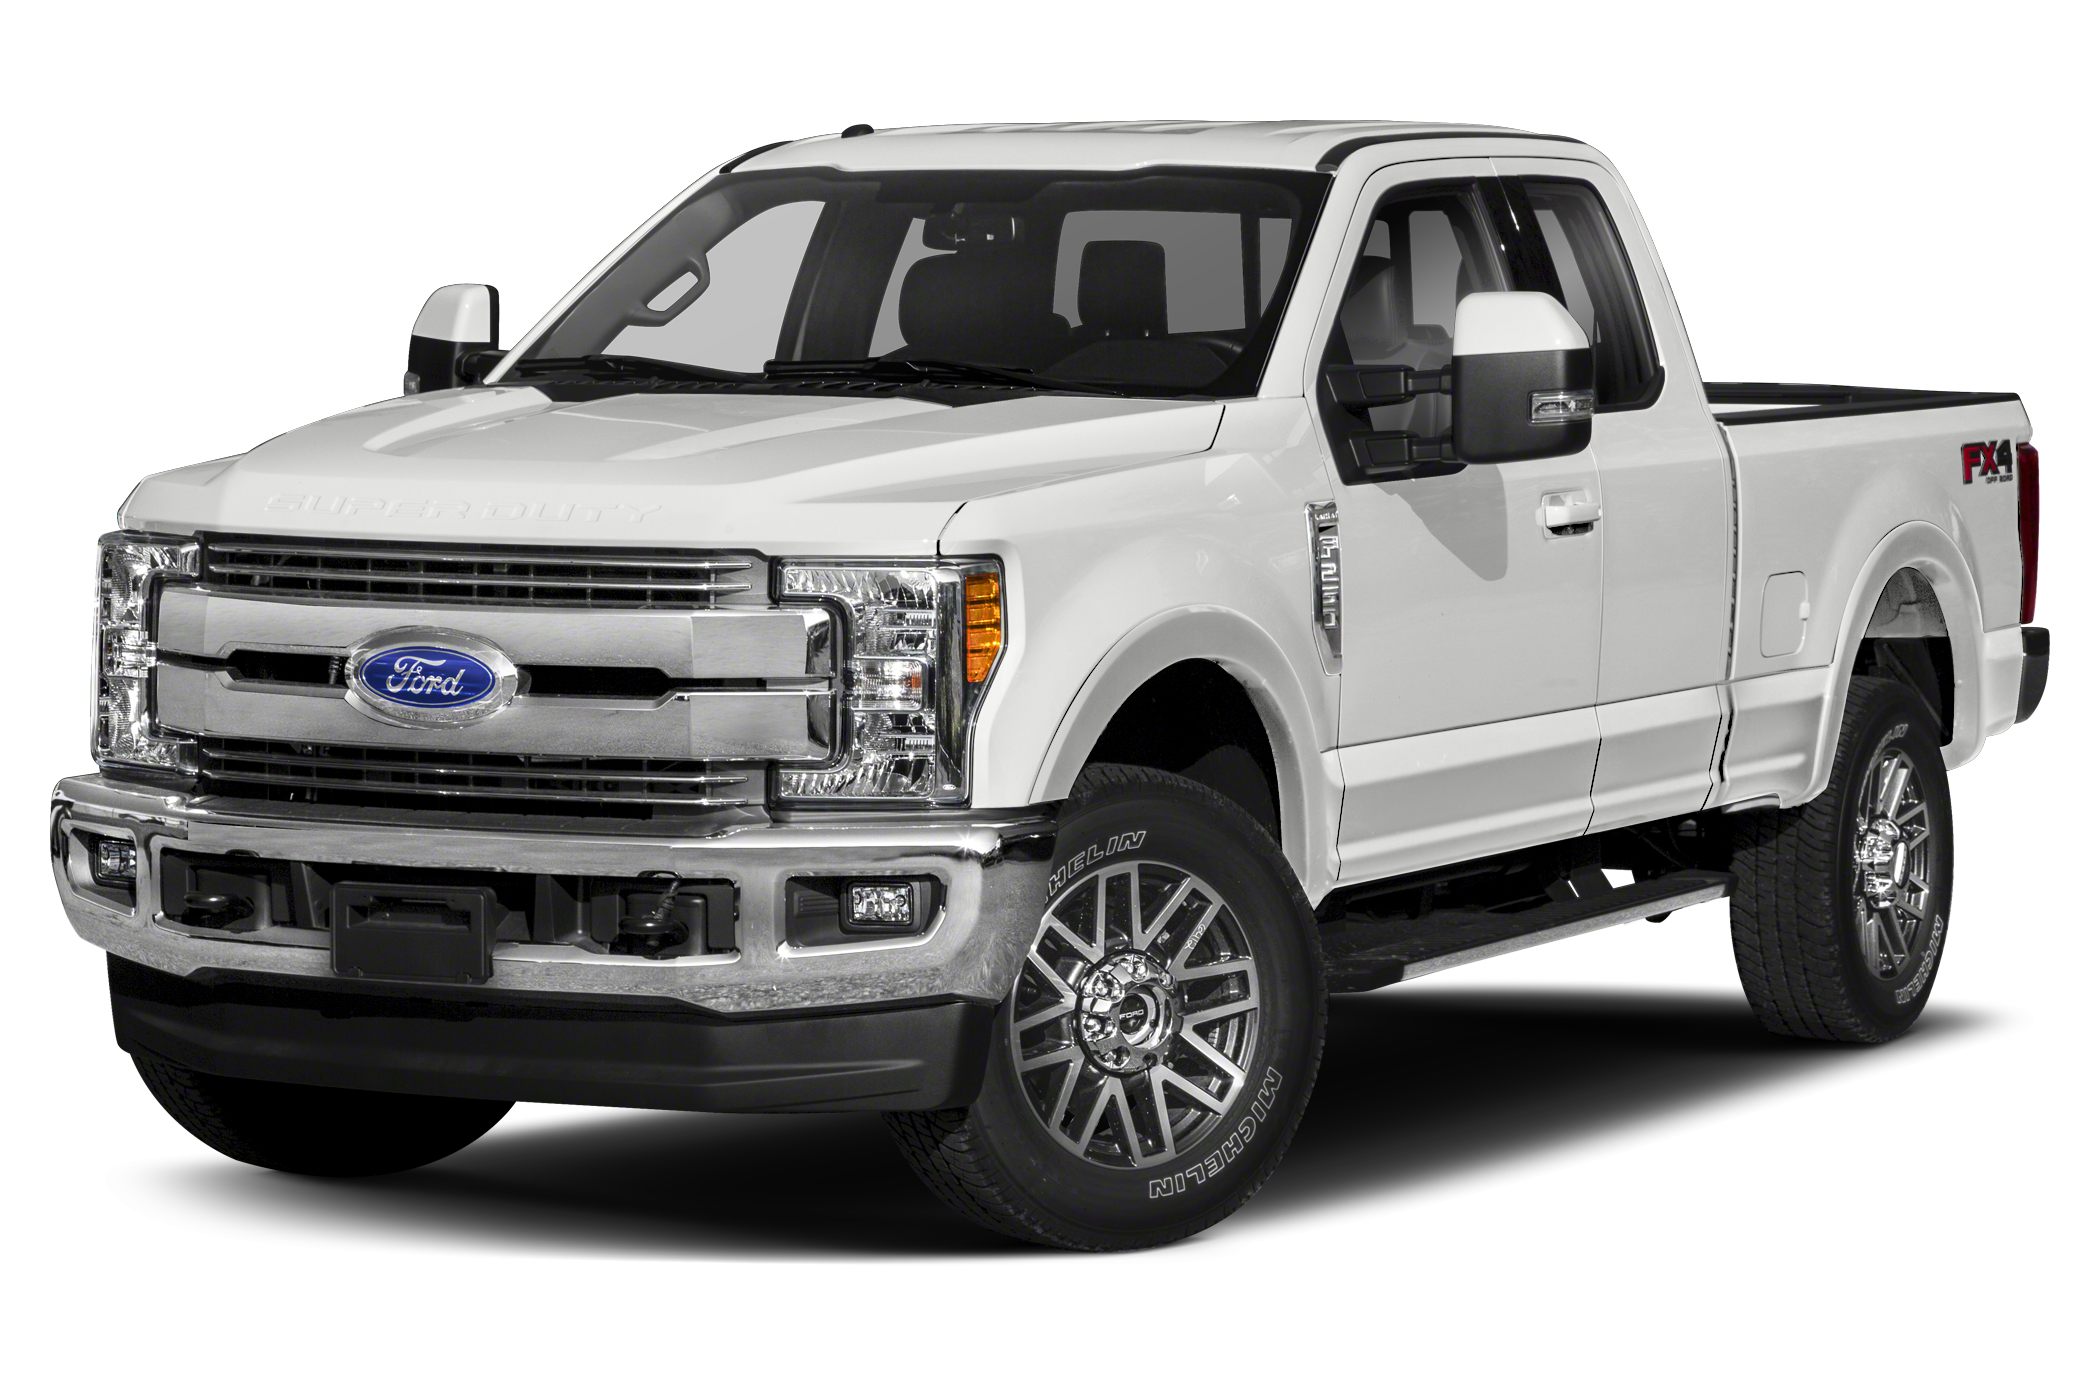 2019 Ford F 350 Lariat 4x4 Sd Super Cab 8 Ft Box 164 In Wb Srw Pictures